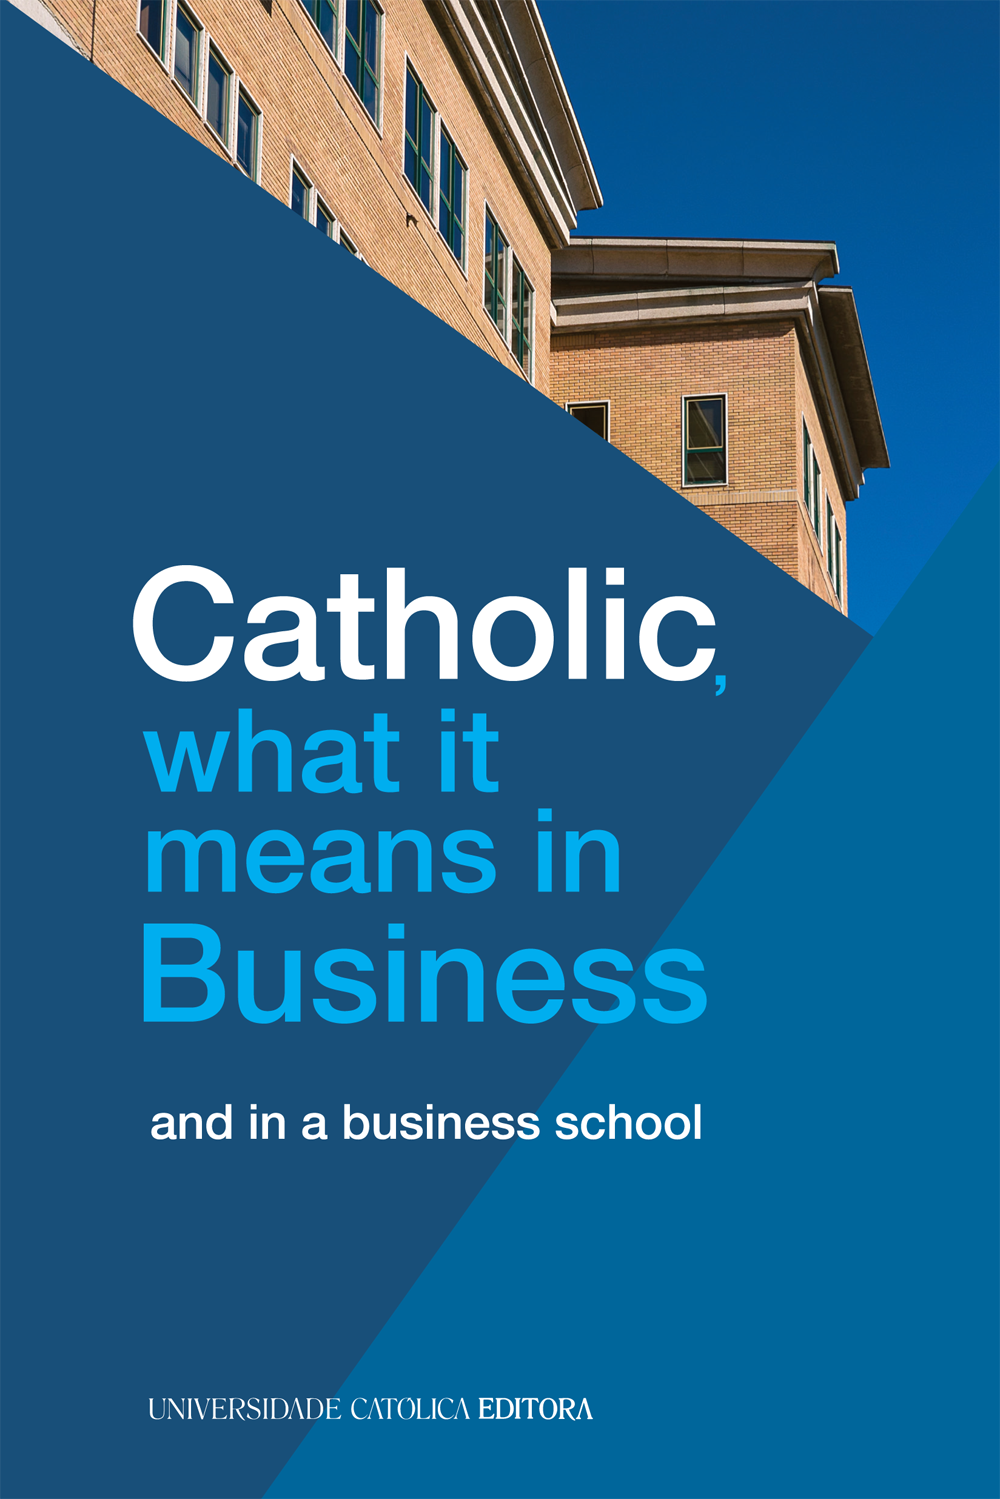 CATHOLIC WHAT IT MEANS IN BUSINESS and in a business school - Universidade Católica Editora 